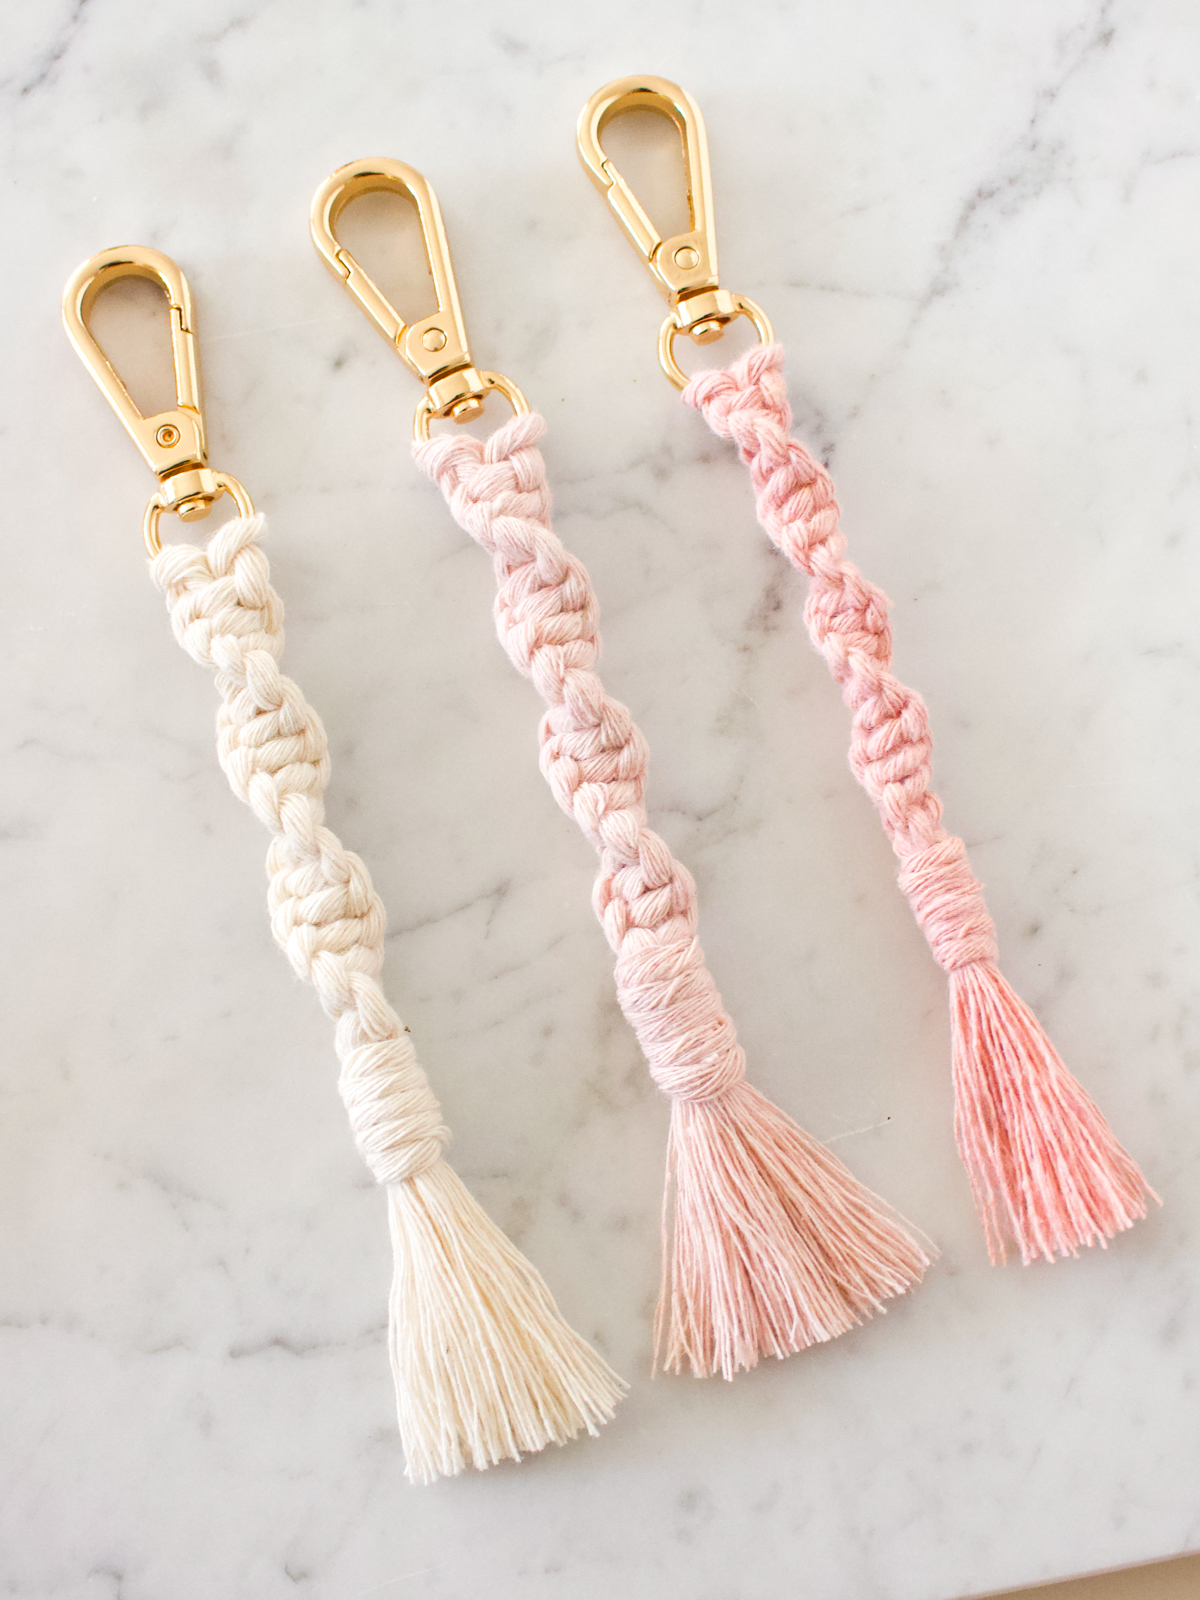 This easy macrame keychain pattern will add a cute boho vibe to your everyday style. This step by step macrame tutorial will show you how easy it is to make your own.